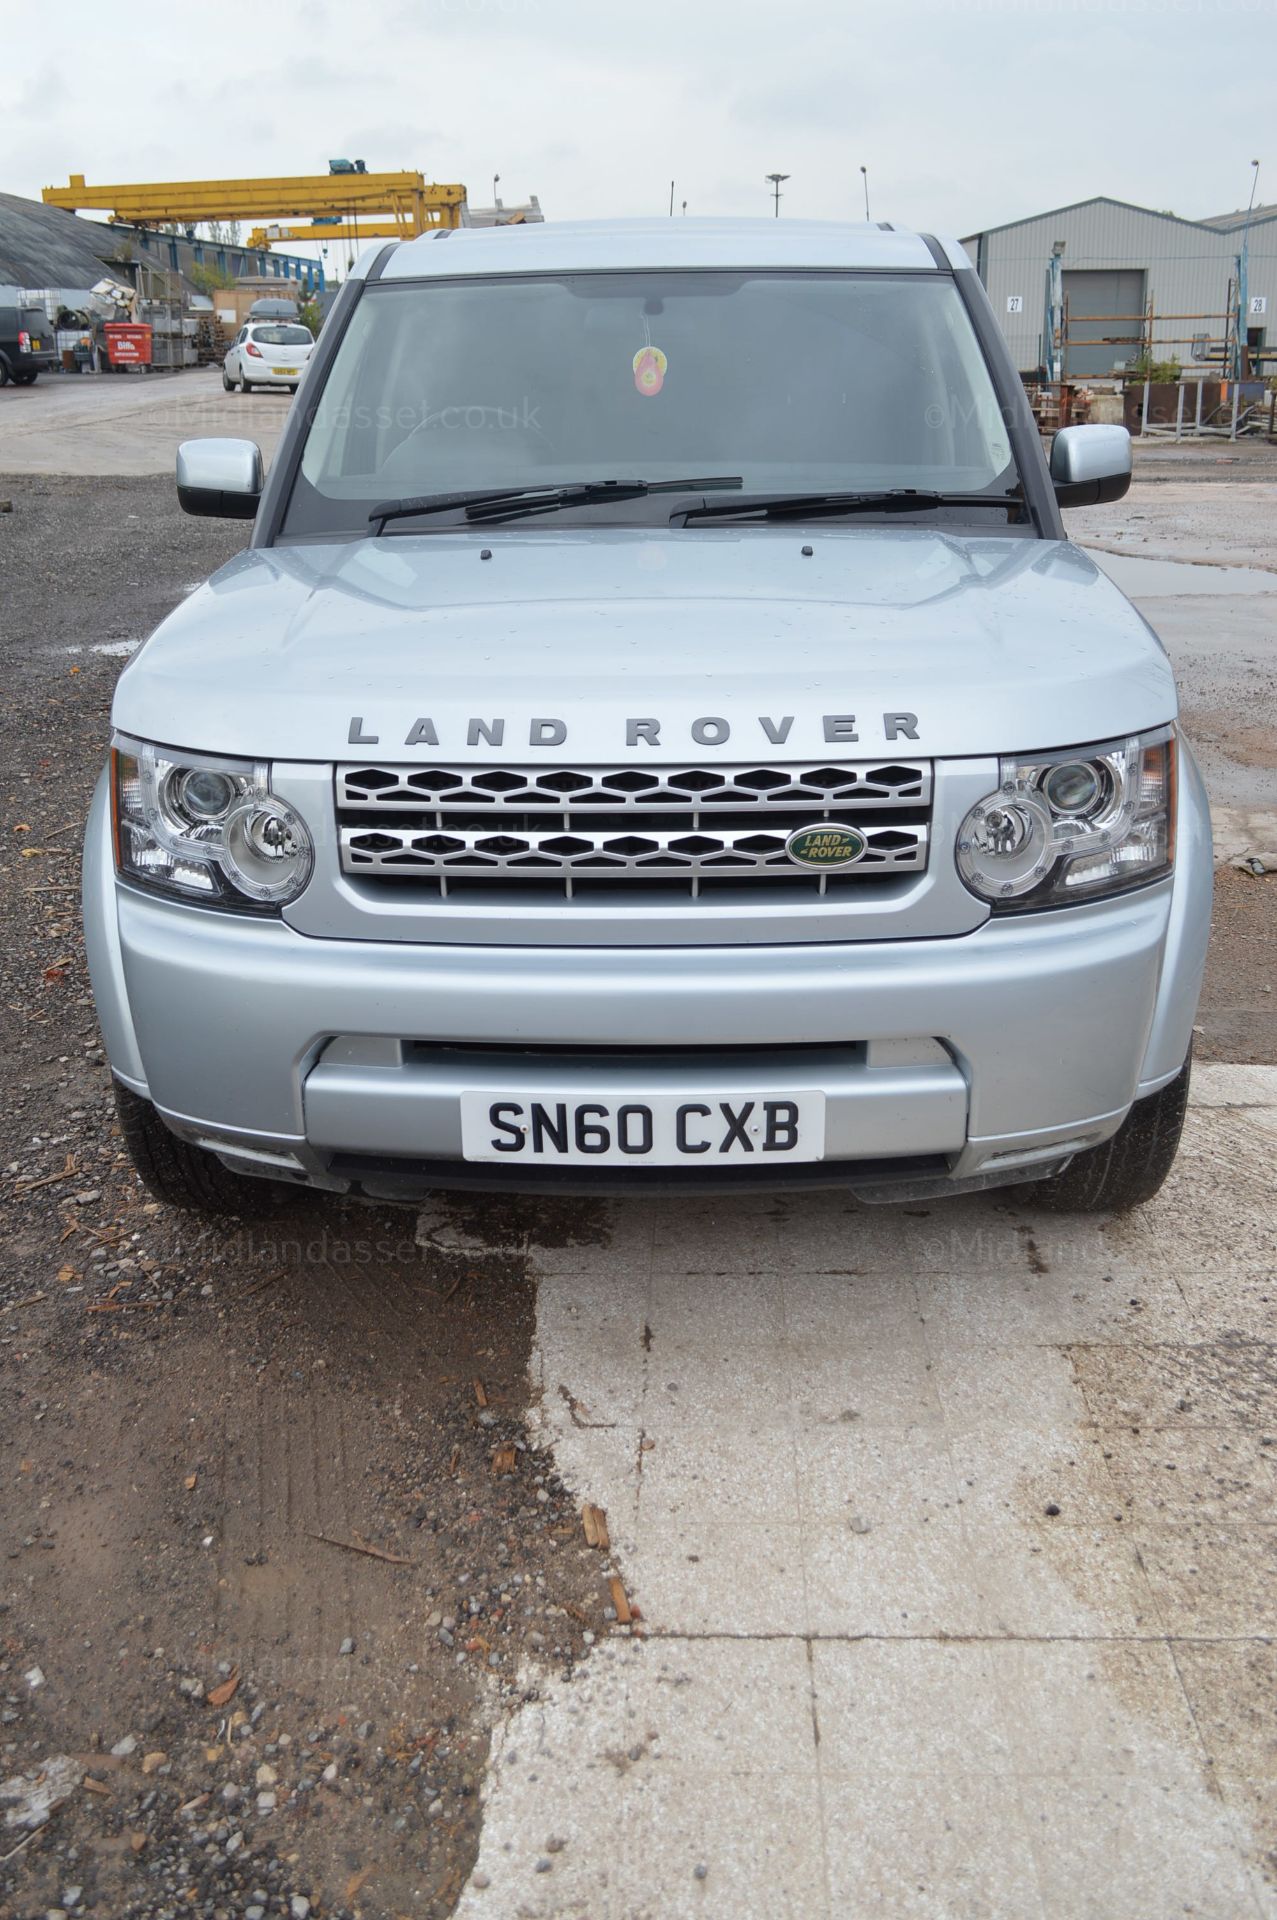 2010/60 REG LAND ROVER DISCOVERY 4 GS TDV6 AUTO 7 SEAT ONE FORMER KEEPER *NO VAT* - Image 3 of 31